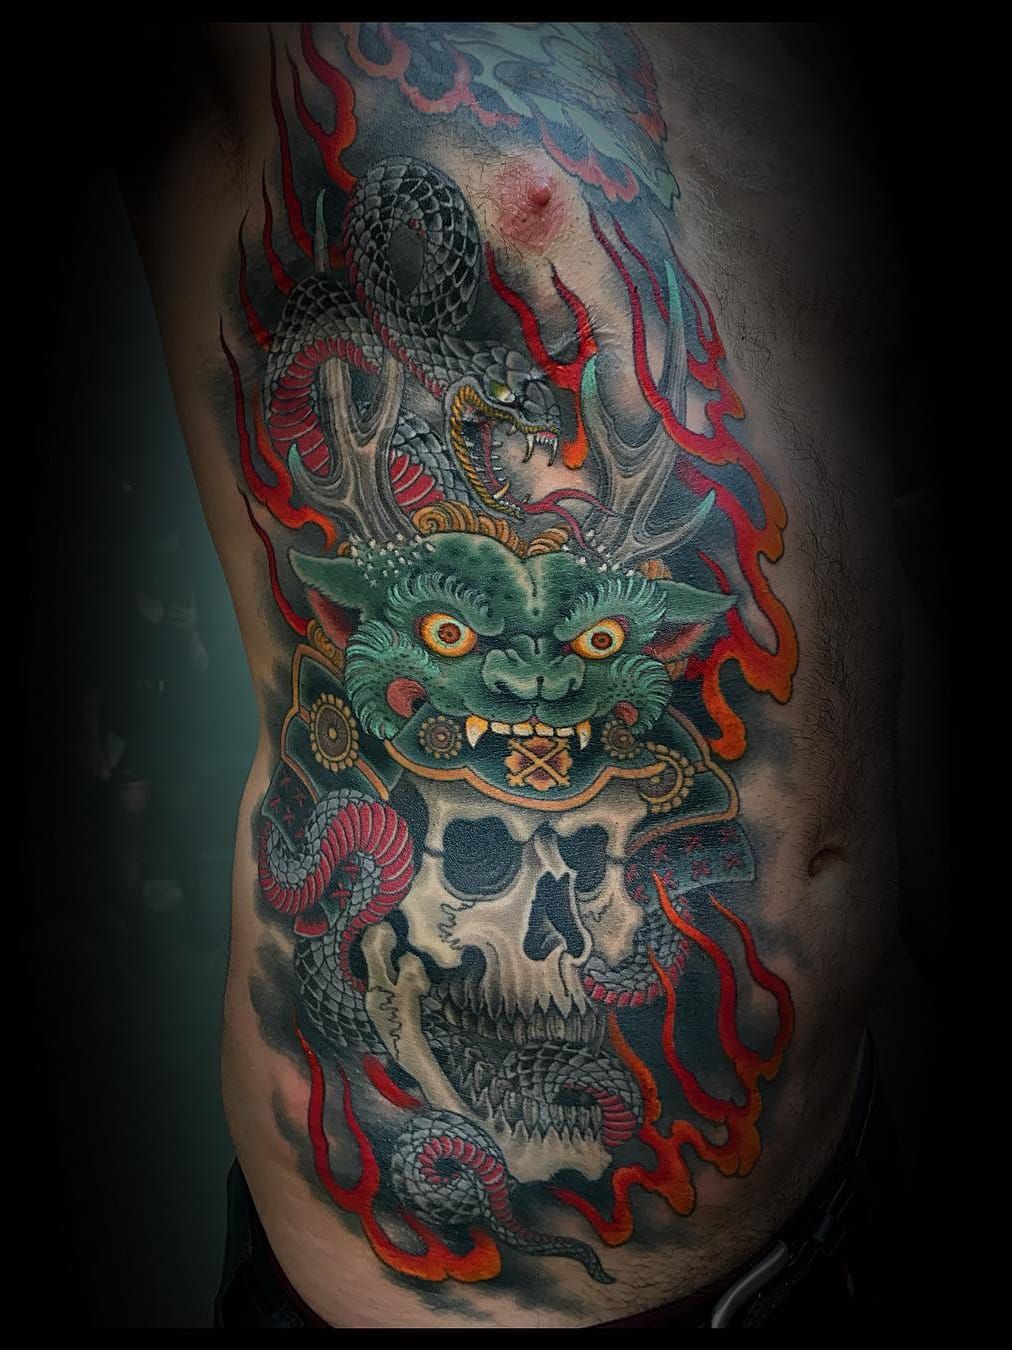 250 Hannya Mask Tattoo Designs With Meaning 2020 Japanese Oni Demon  Samurai  tattoo design Hannya mask tattoo Japanese mask tattoo